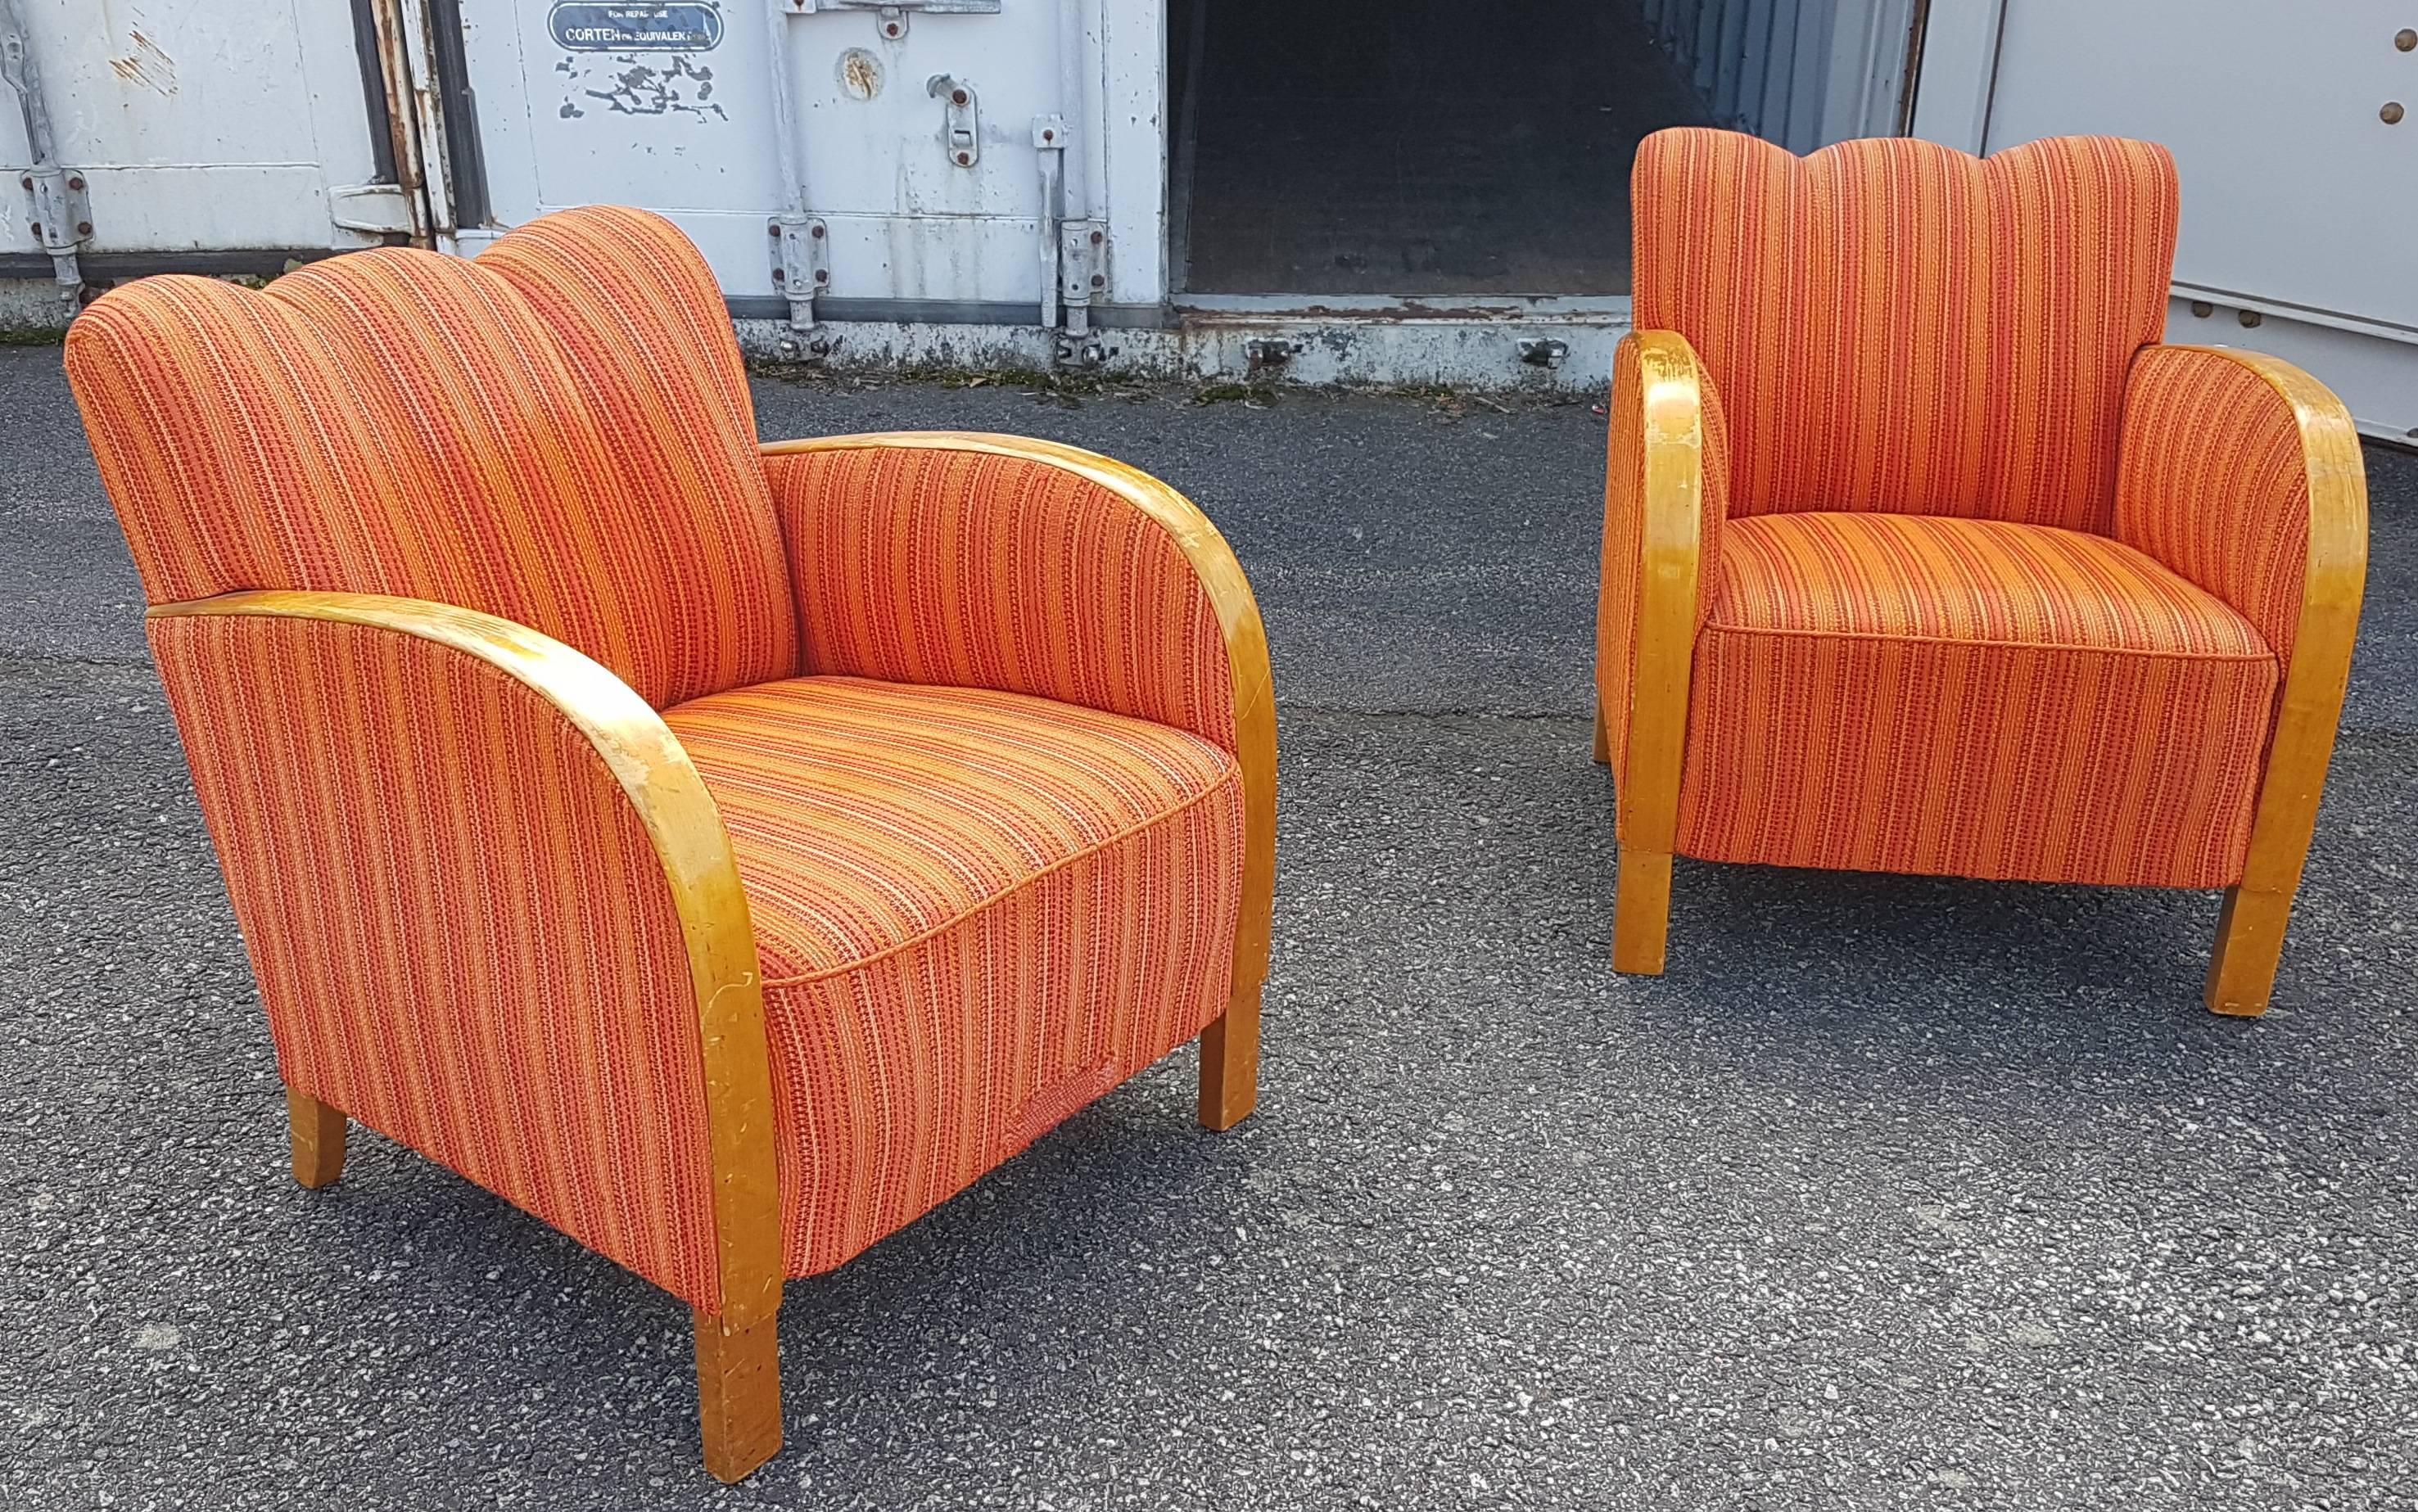 This is a Classic pair of original Swedish Art Deco armchairs with golden birch bentwood arms in a rich honey color French polish finish. They have the rare fluted back which are hard to find.

The extra deep fully sprung seats on these armchairs